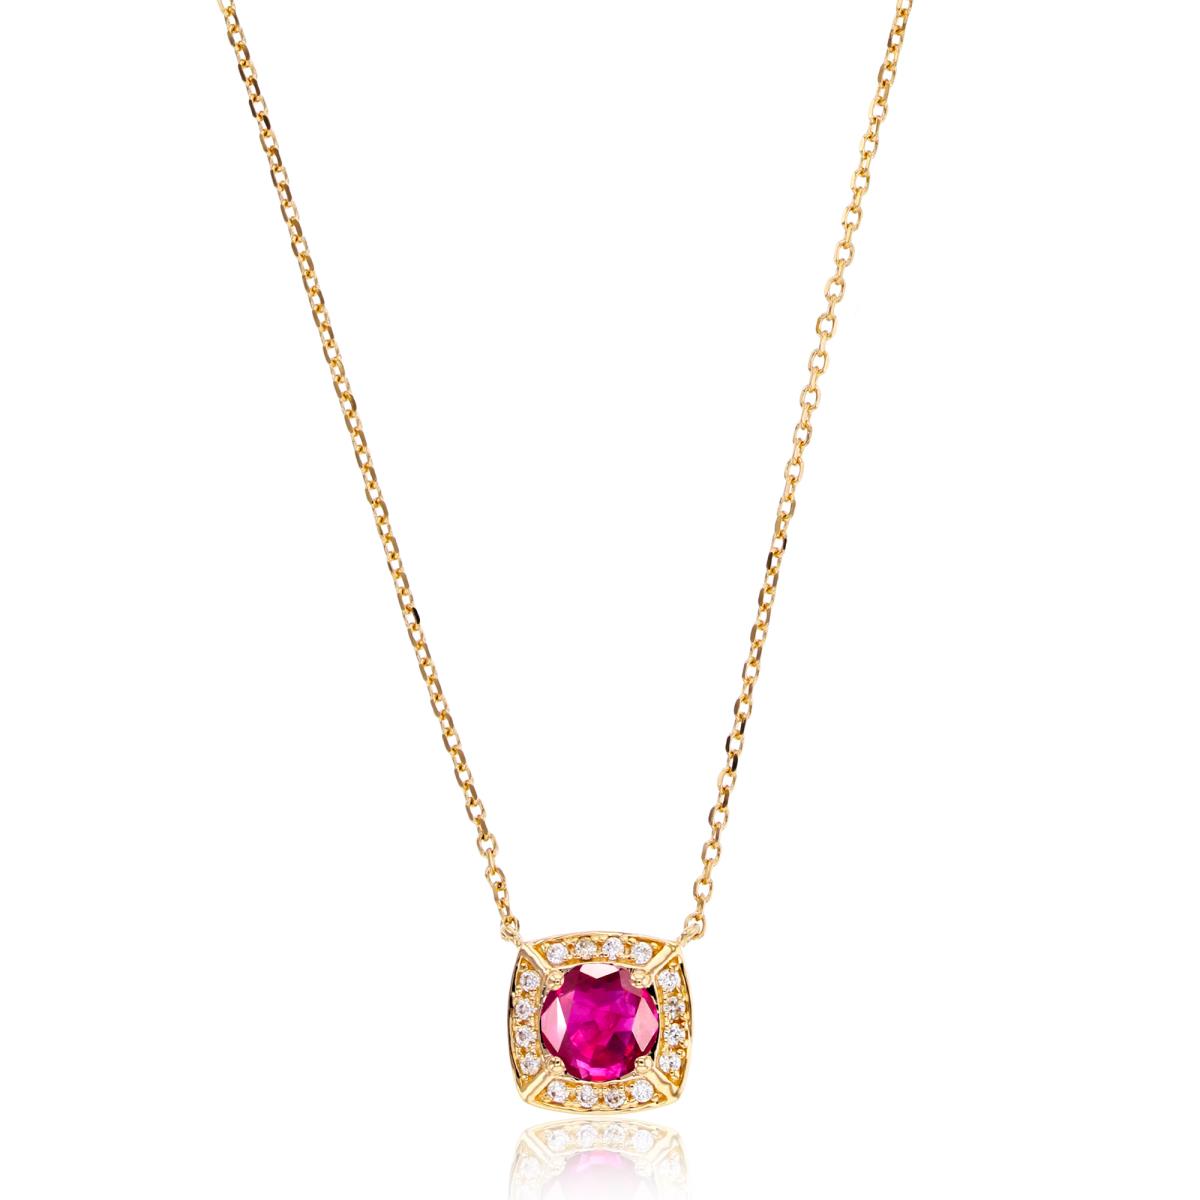 14K Yellow Gold 0.08 CTTW Rd Diamond & 5mm Rd Glass Filled Ruby Cushion 18" Necklace